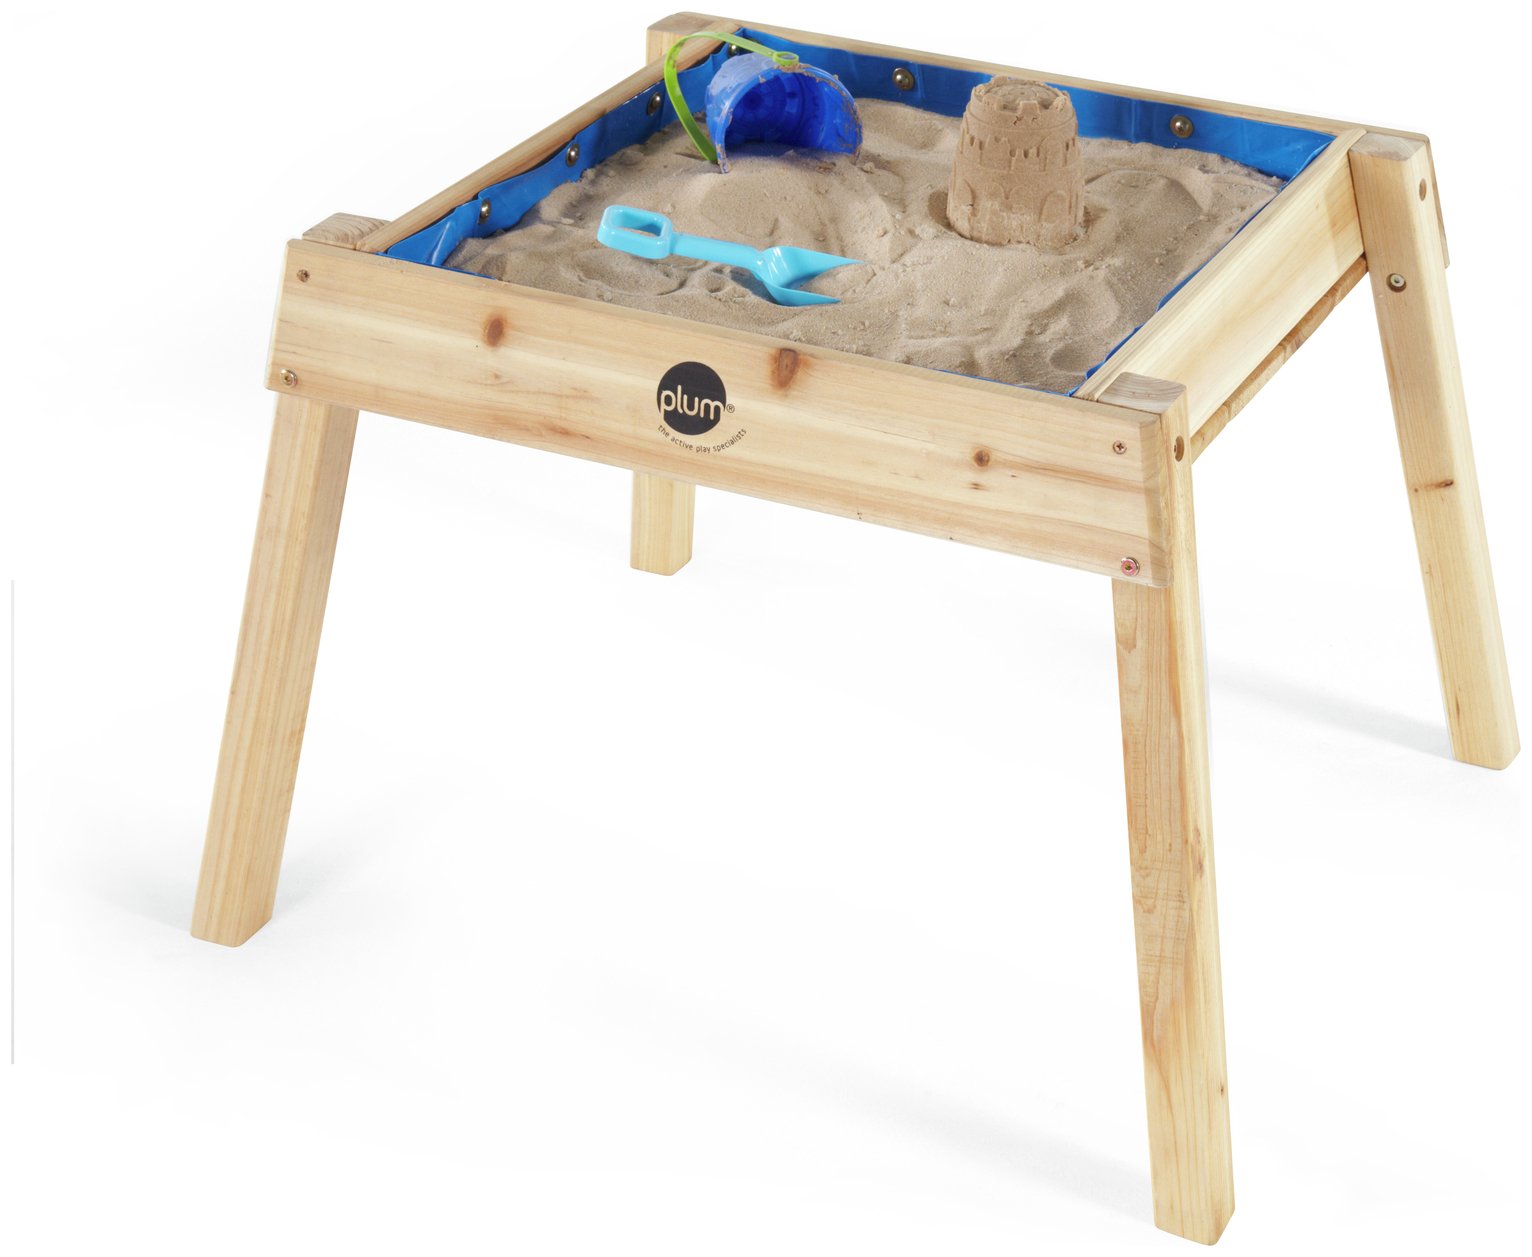 Plum Build and Splash Wooden Sand and Water Table. review